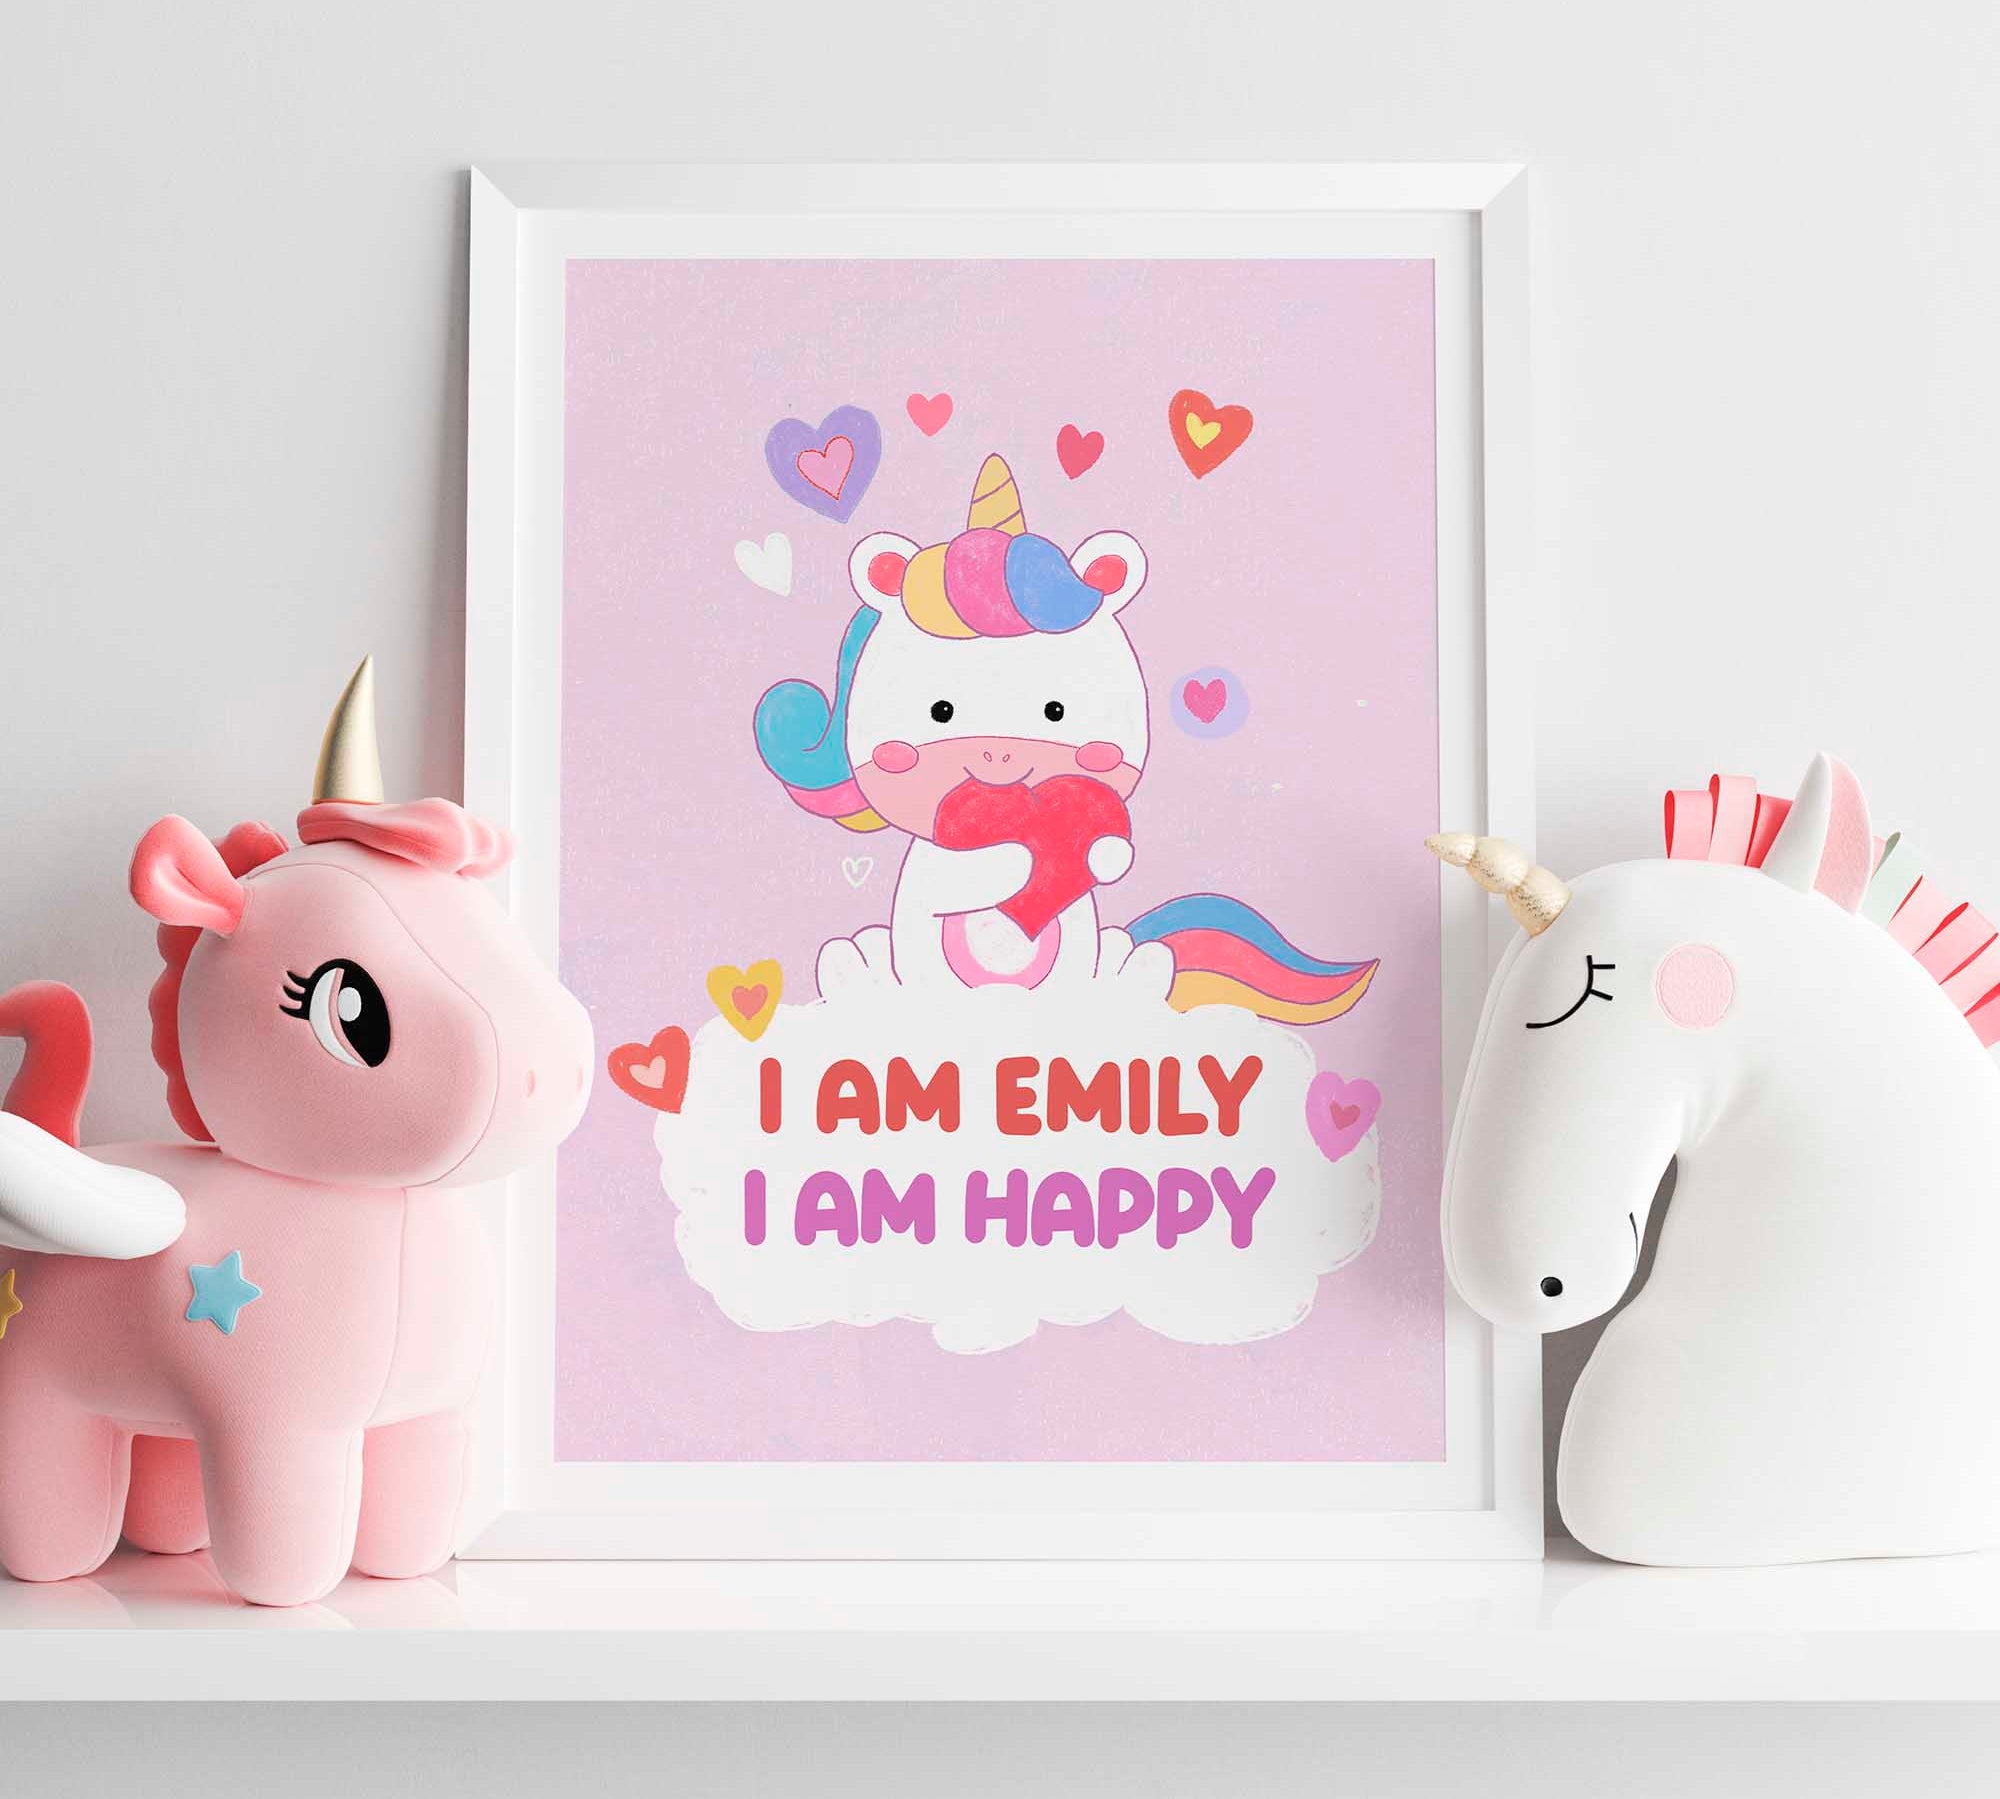 unicorn poster with affirmations, ideal for a girl's nursery decor.